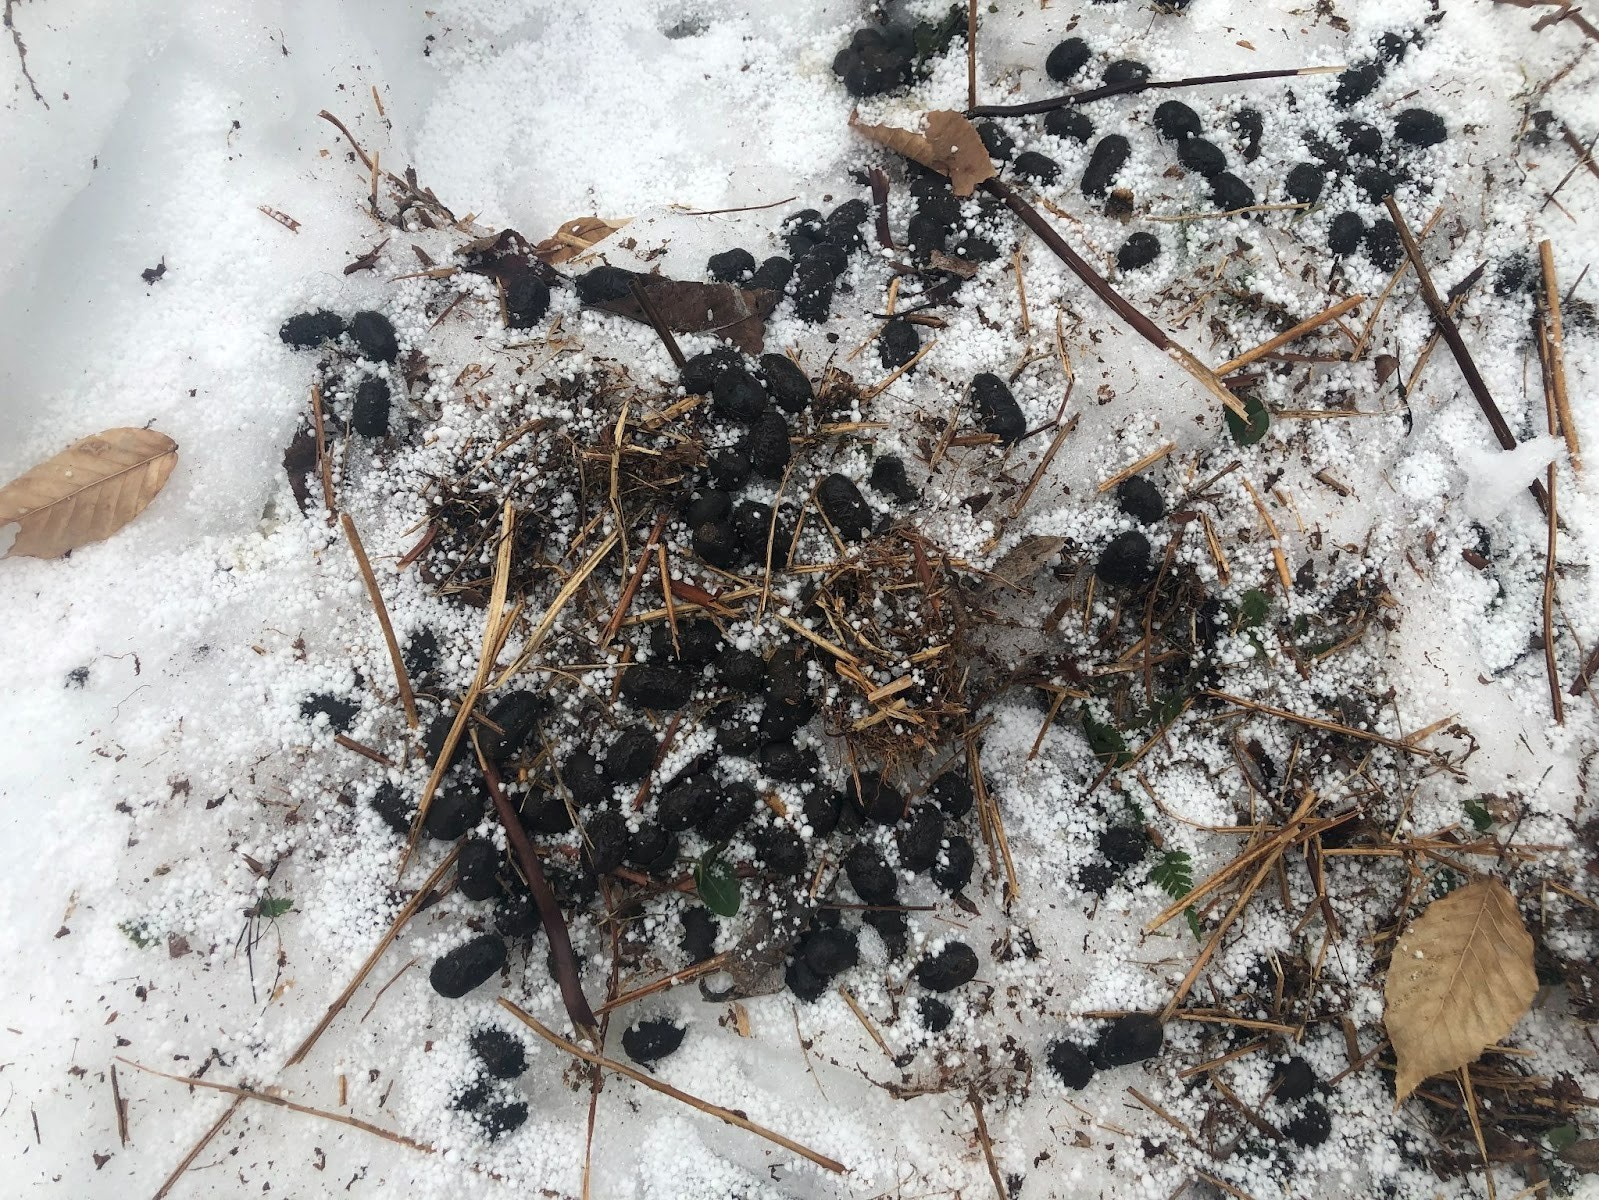 Deer scat on snow photo by AccuForage PA Wilds